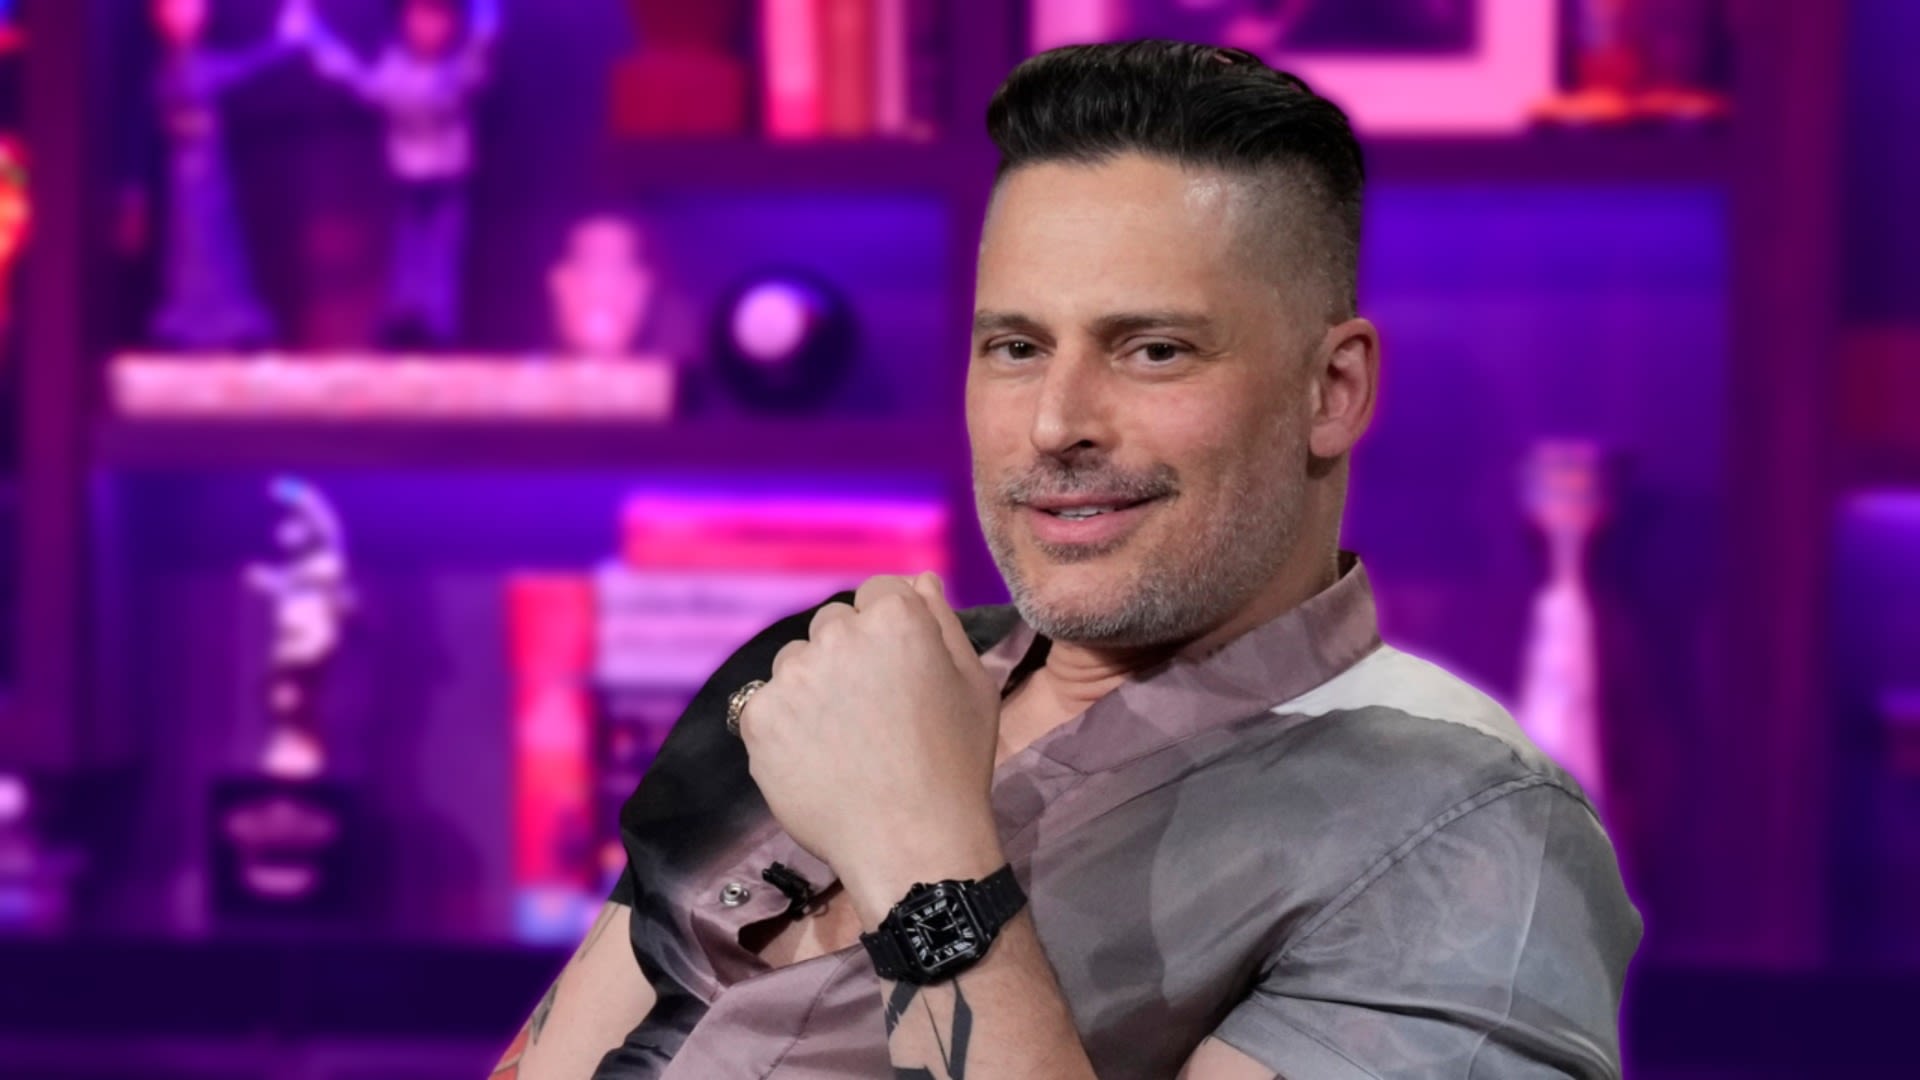 What Did Joe Manganiello Used to Shoplift in His Youth? | Bravo TV Official Site